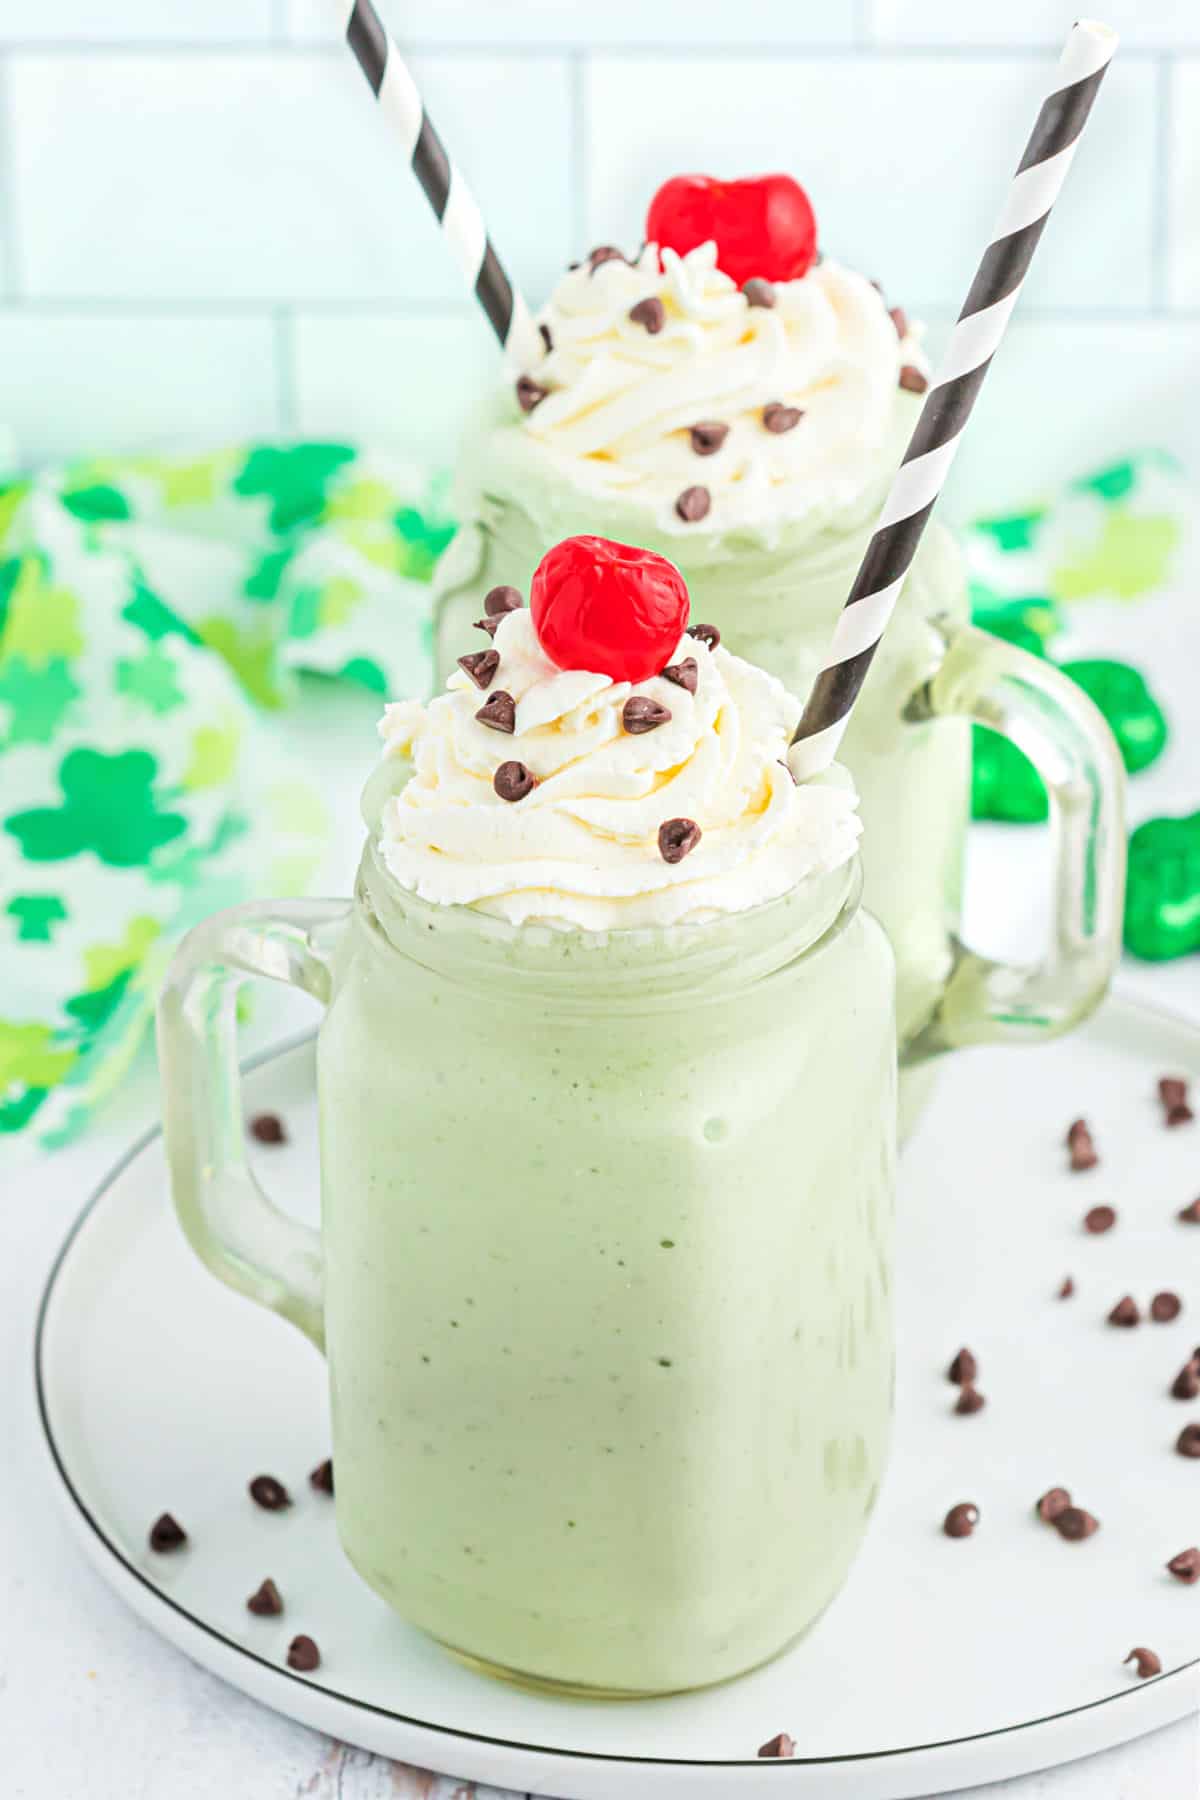 Shamrock shake in a glass mugs with whipped cream and a cherry.